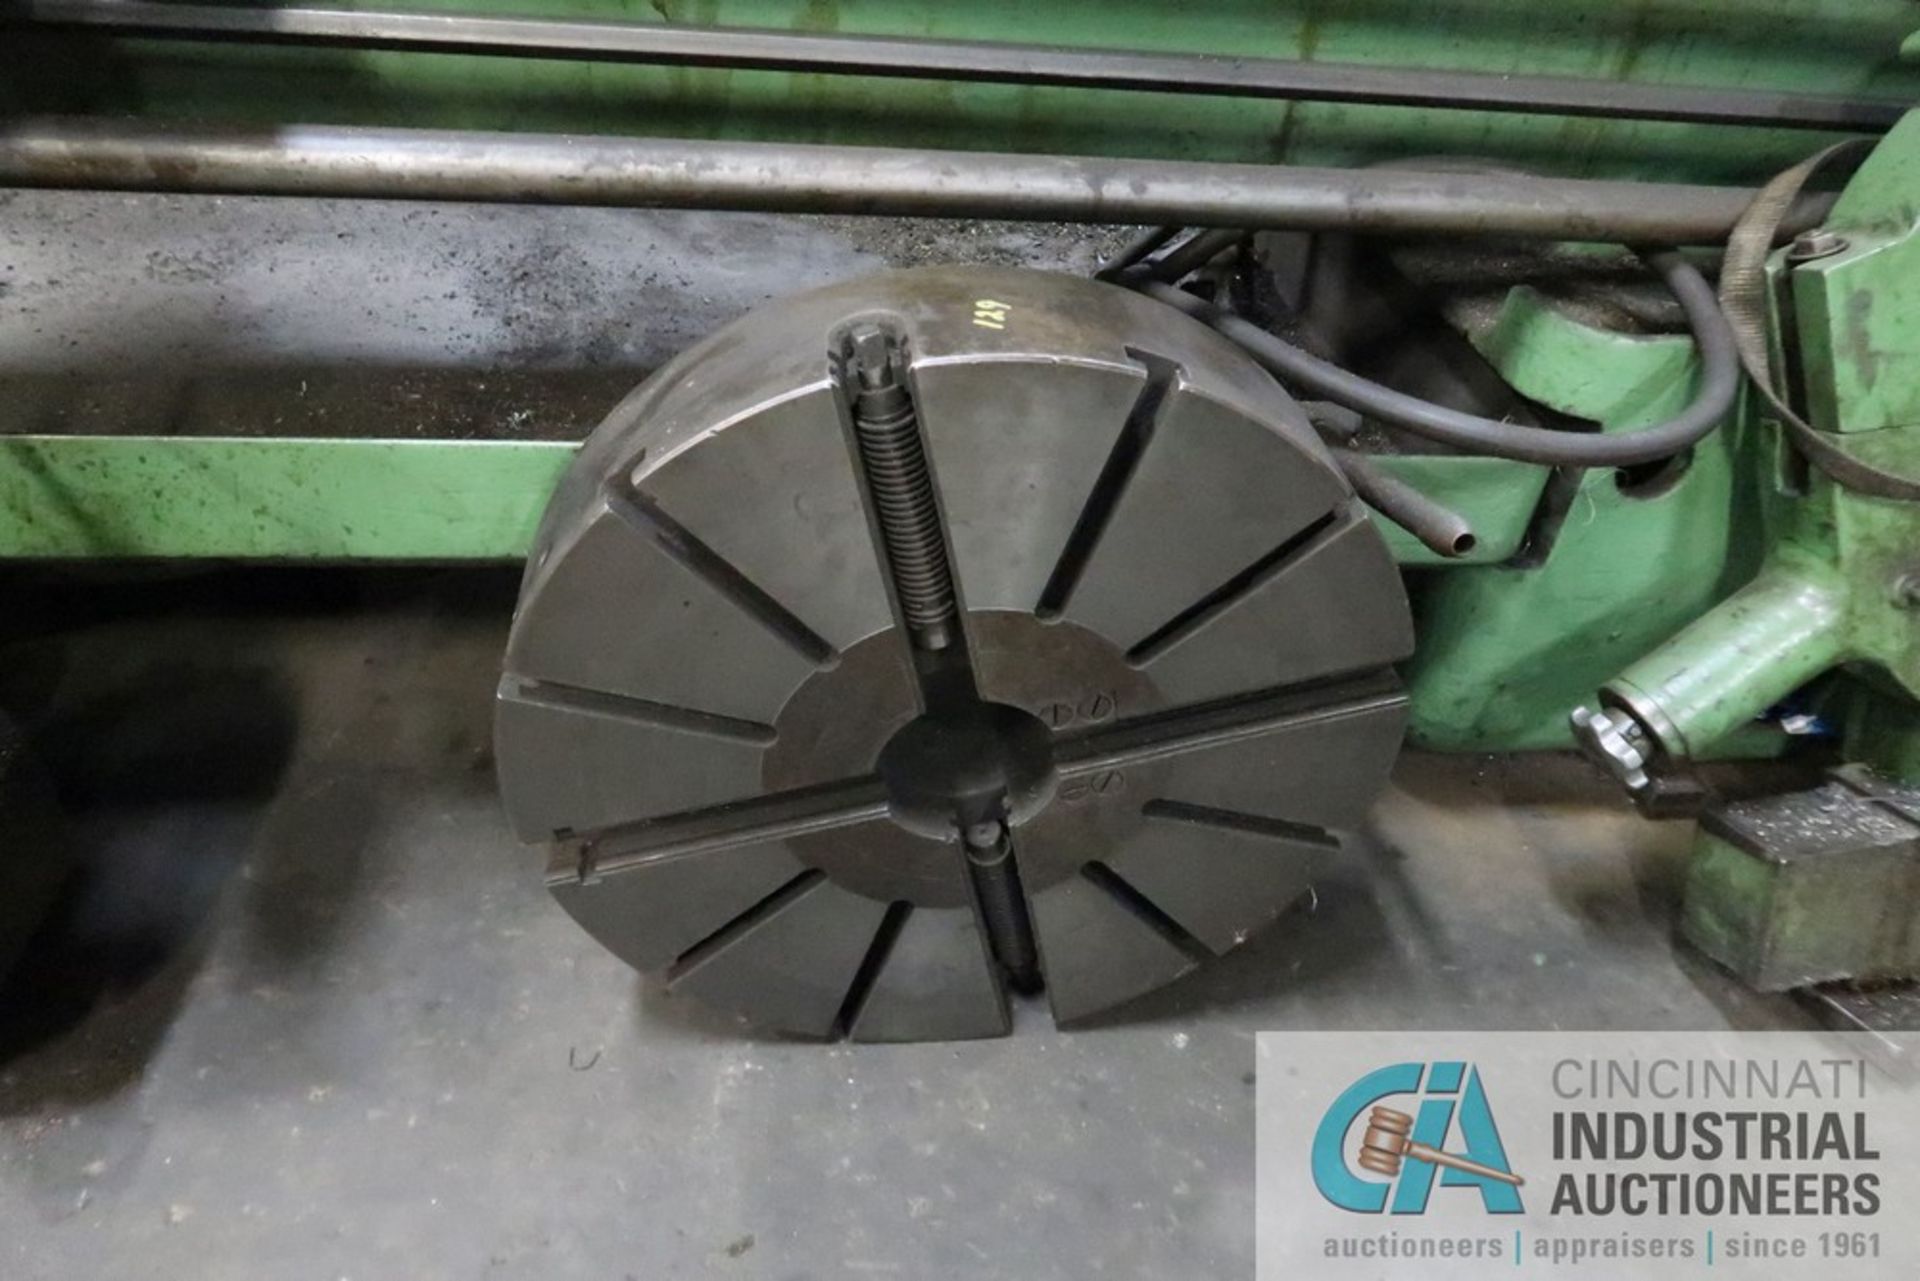 24" / 35" X 96" CLOVER GAP BED LATHE, 2-1/2" SPINDLE HOLE, 33-1/2" FACE PLATE, STEADY REST, WITH - Image 14 of 15